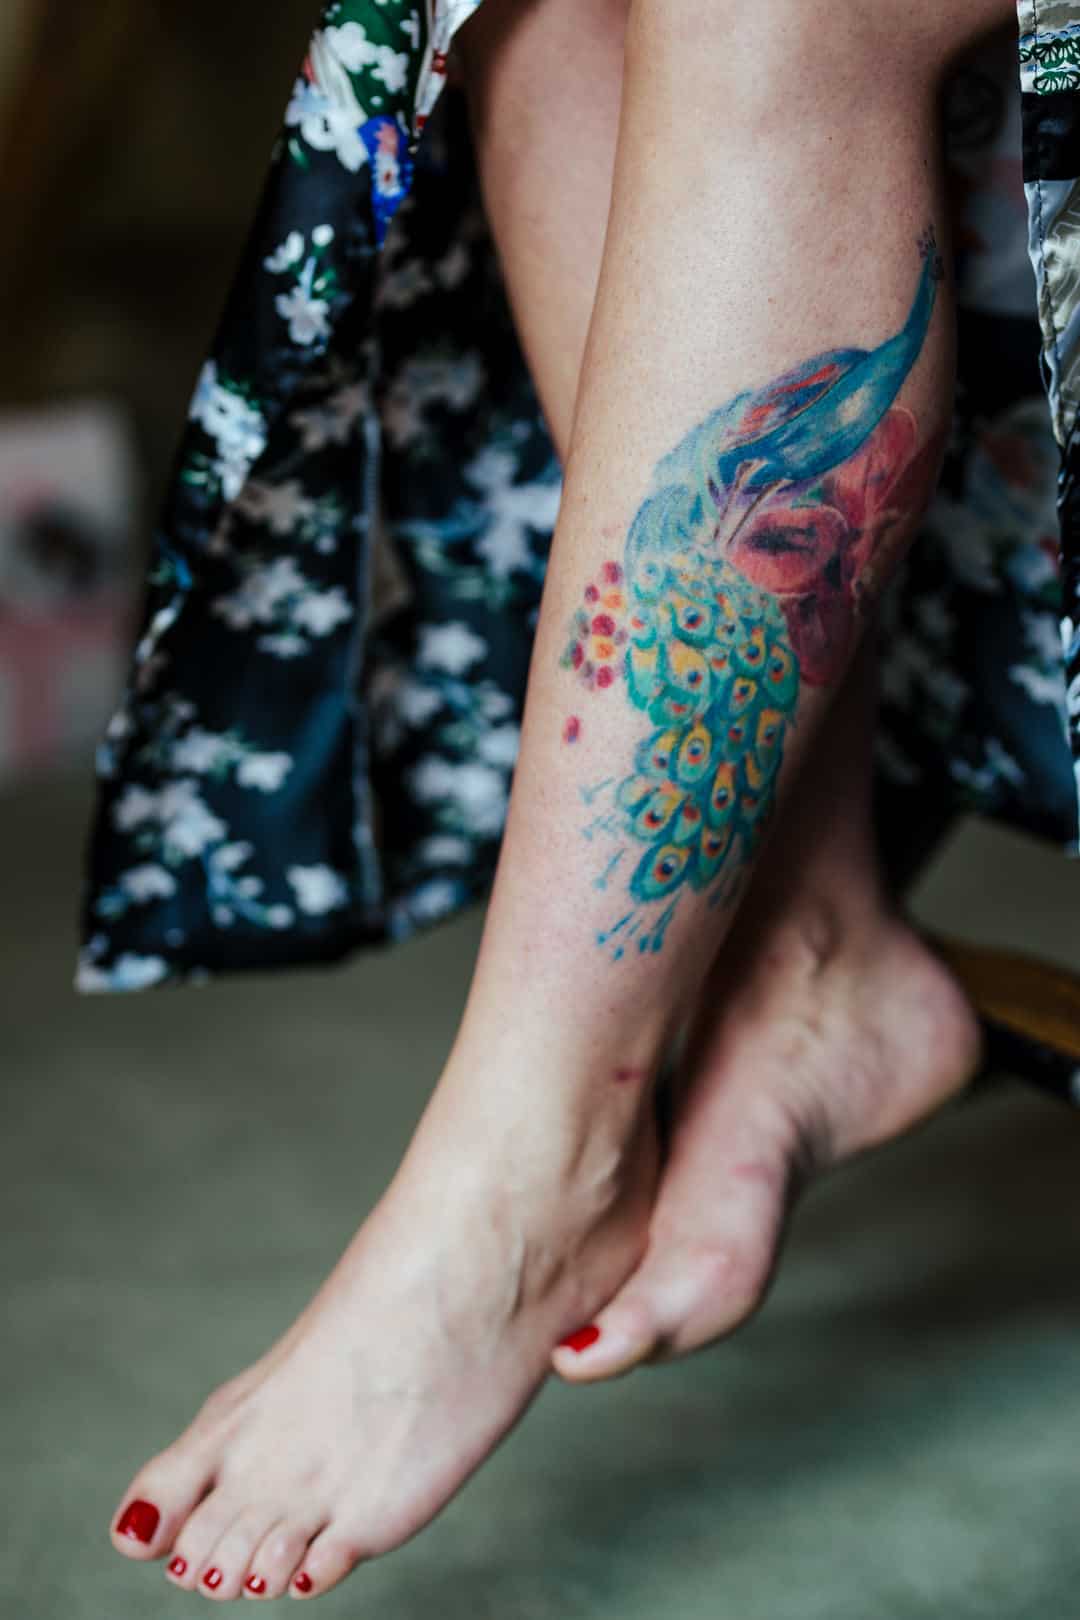 tatoo of a peacock on a woman's leg